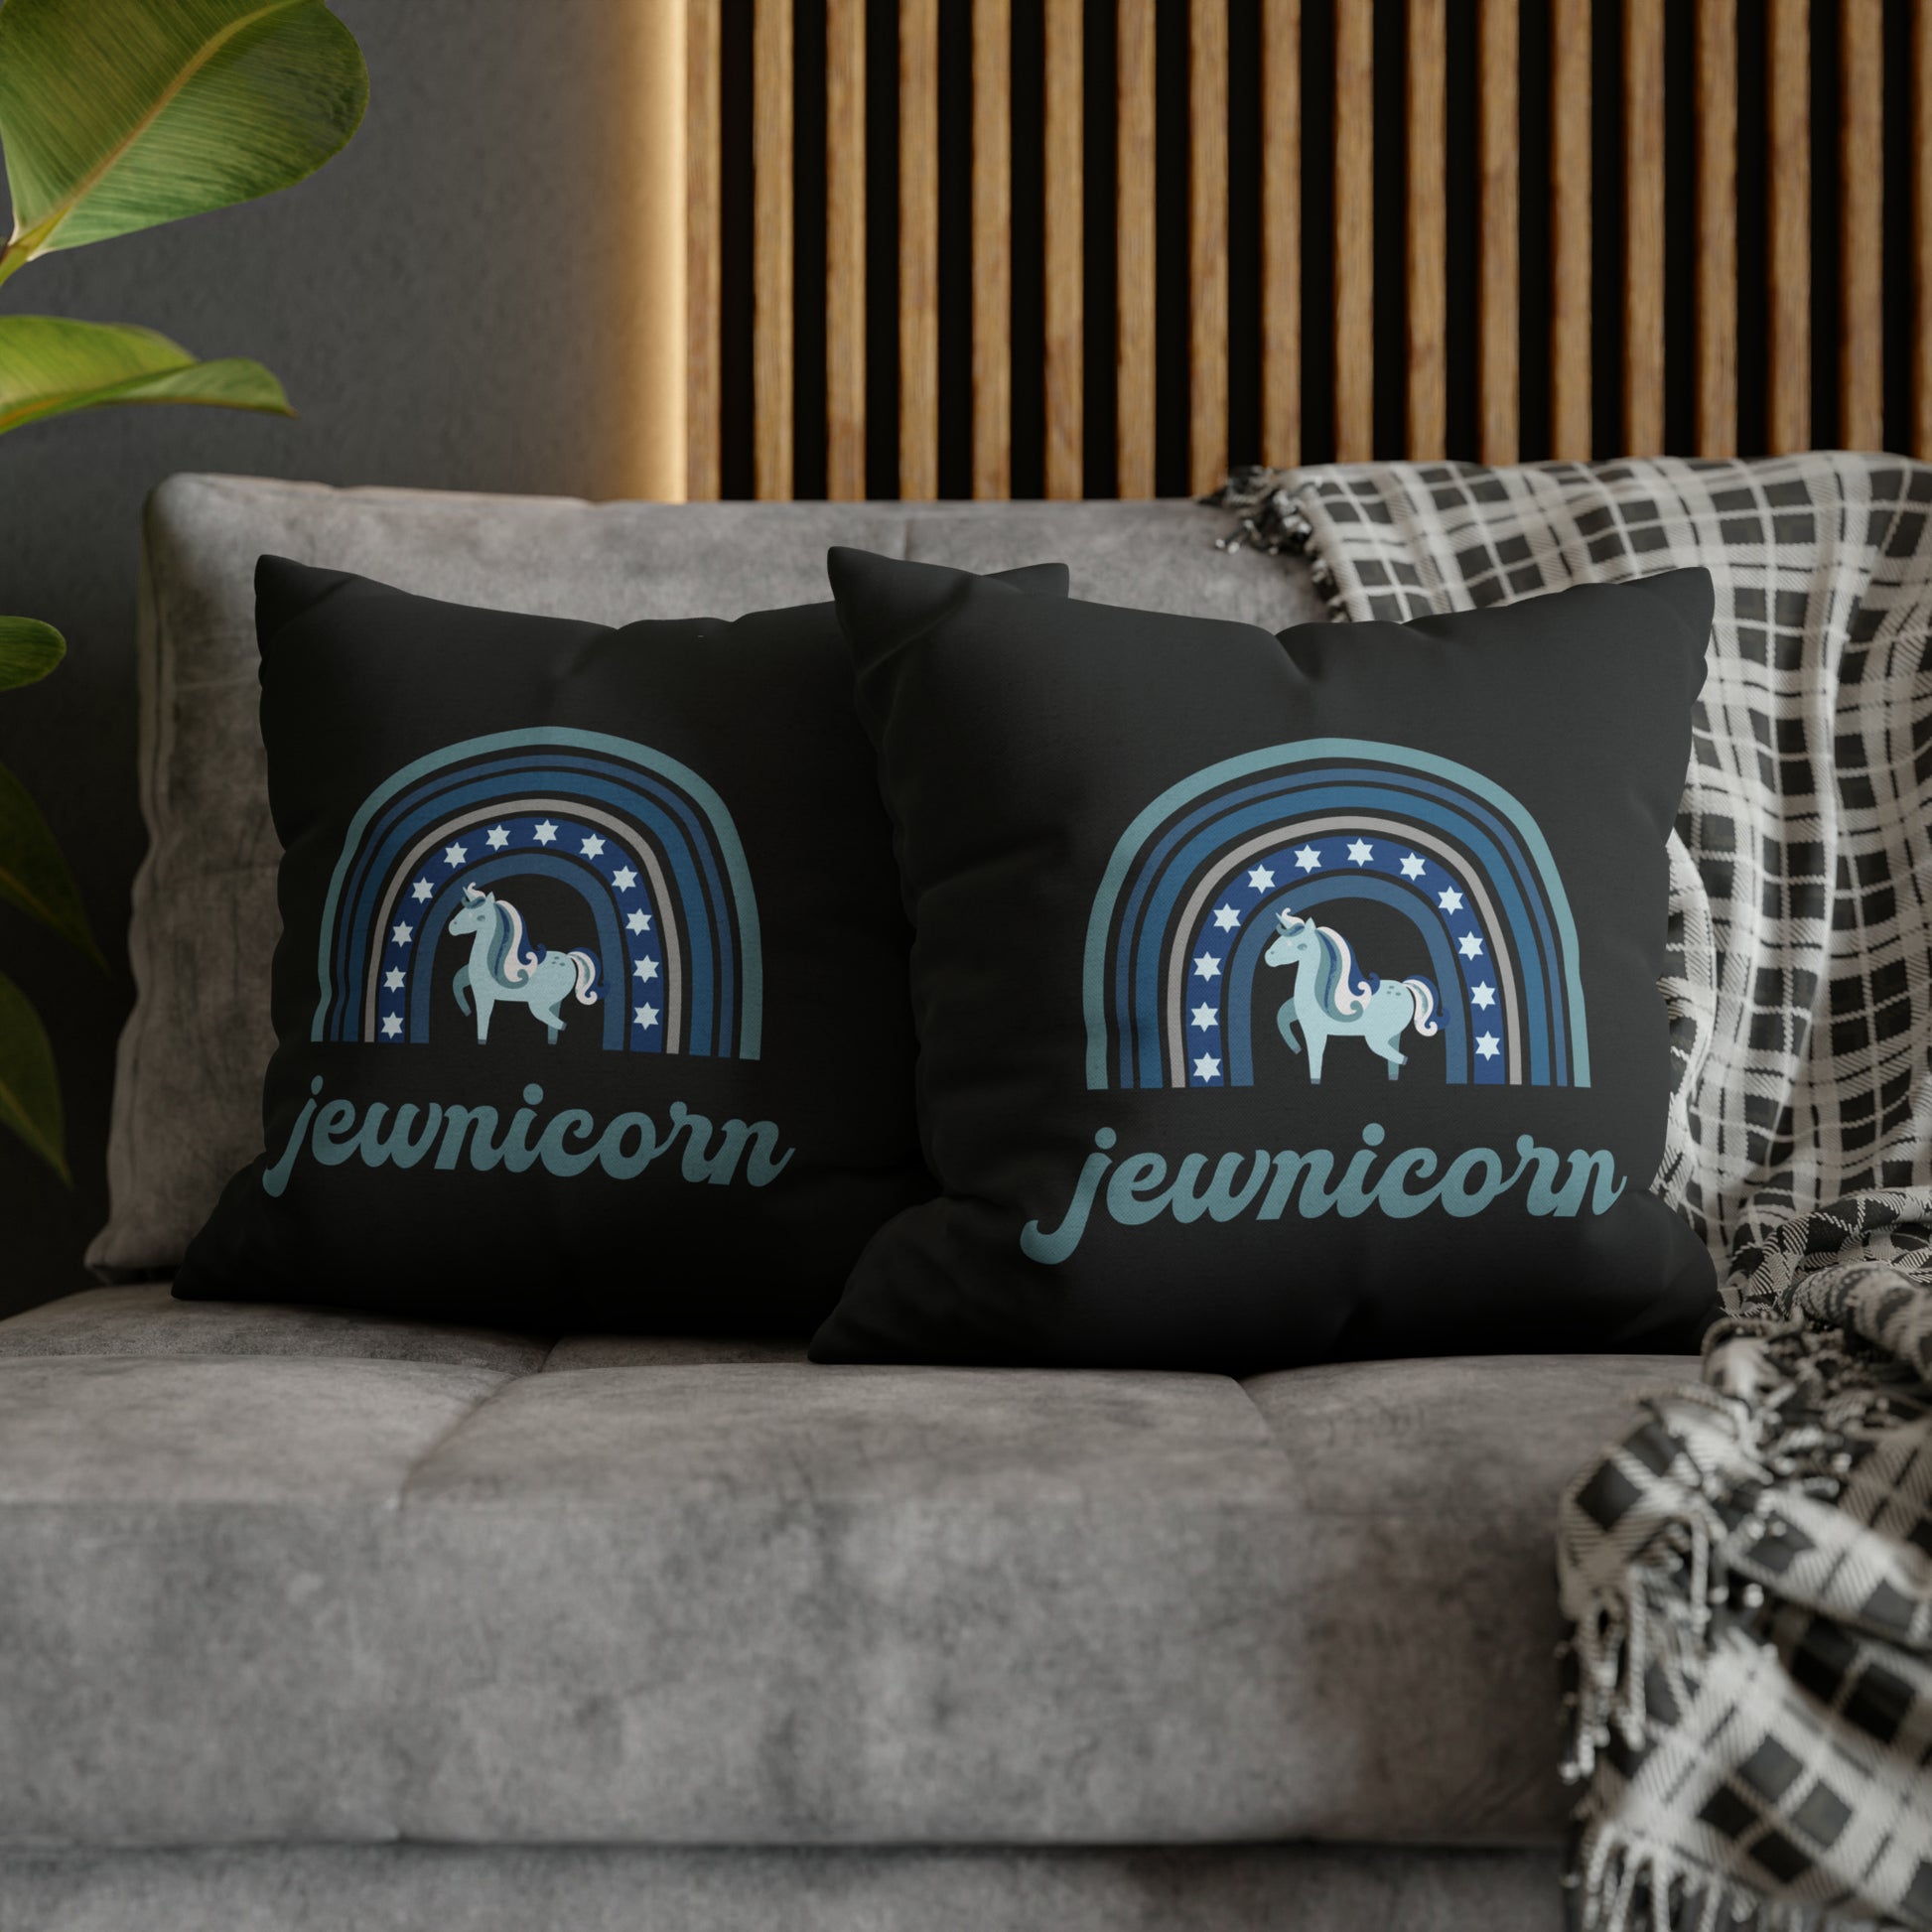 jewnicorn funny hanukkah couch pillow covers